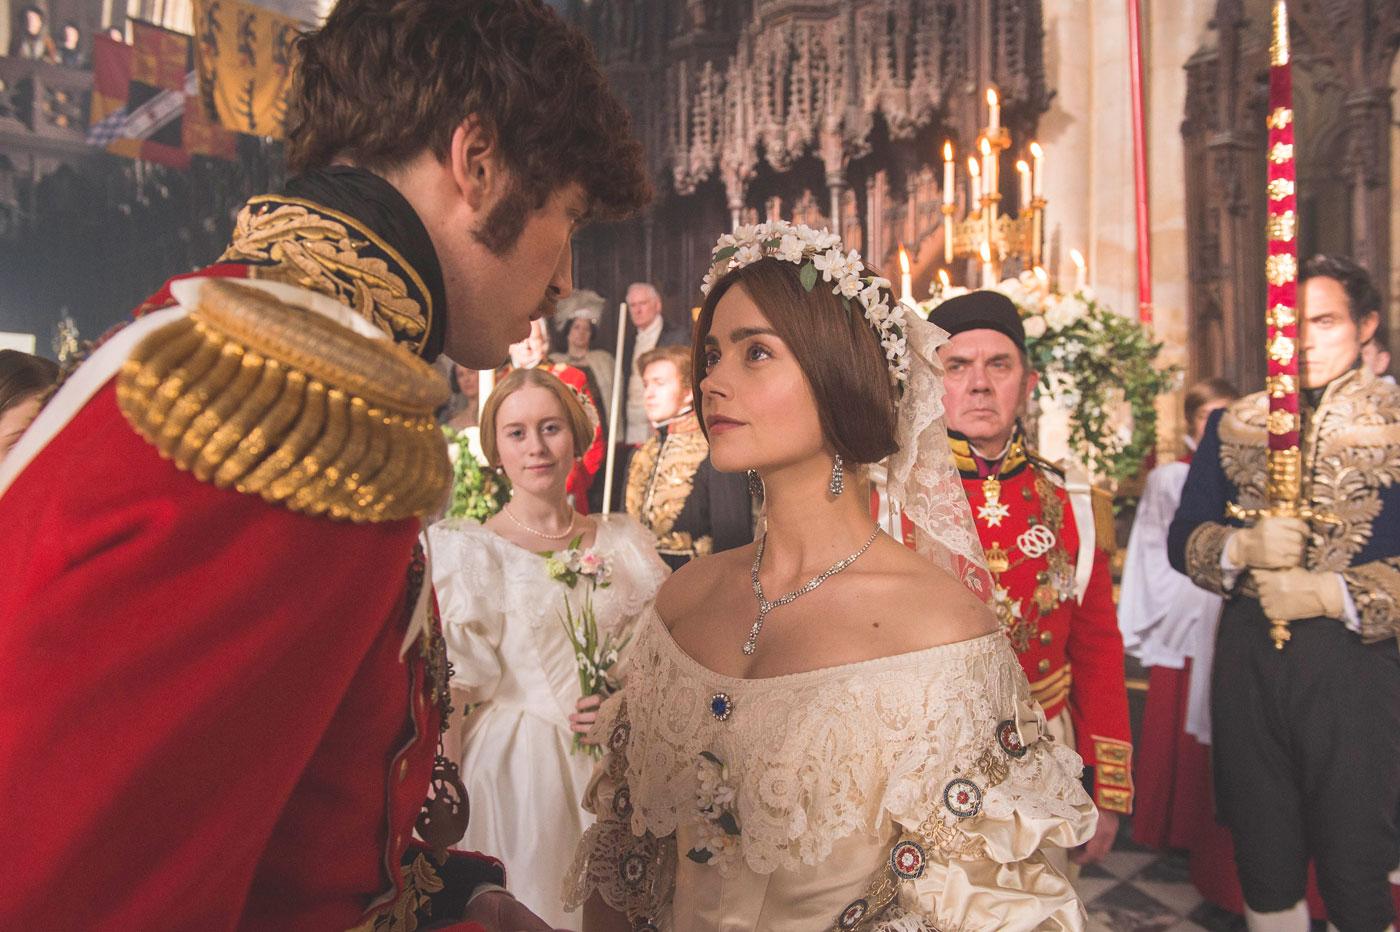 Prince Albert and Queen Victoria at their wedding. (ITV Plc)